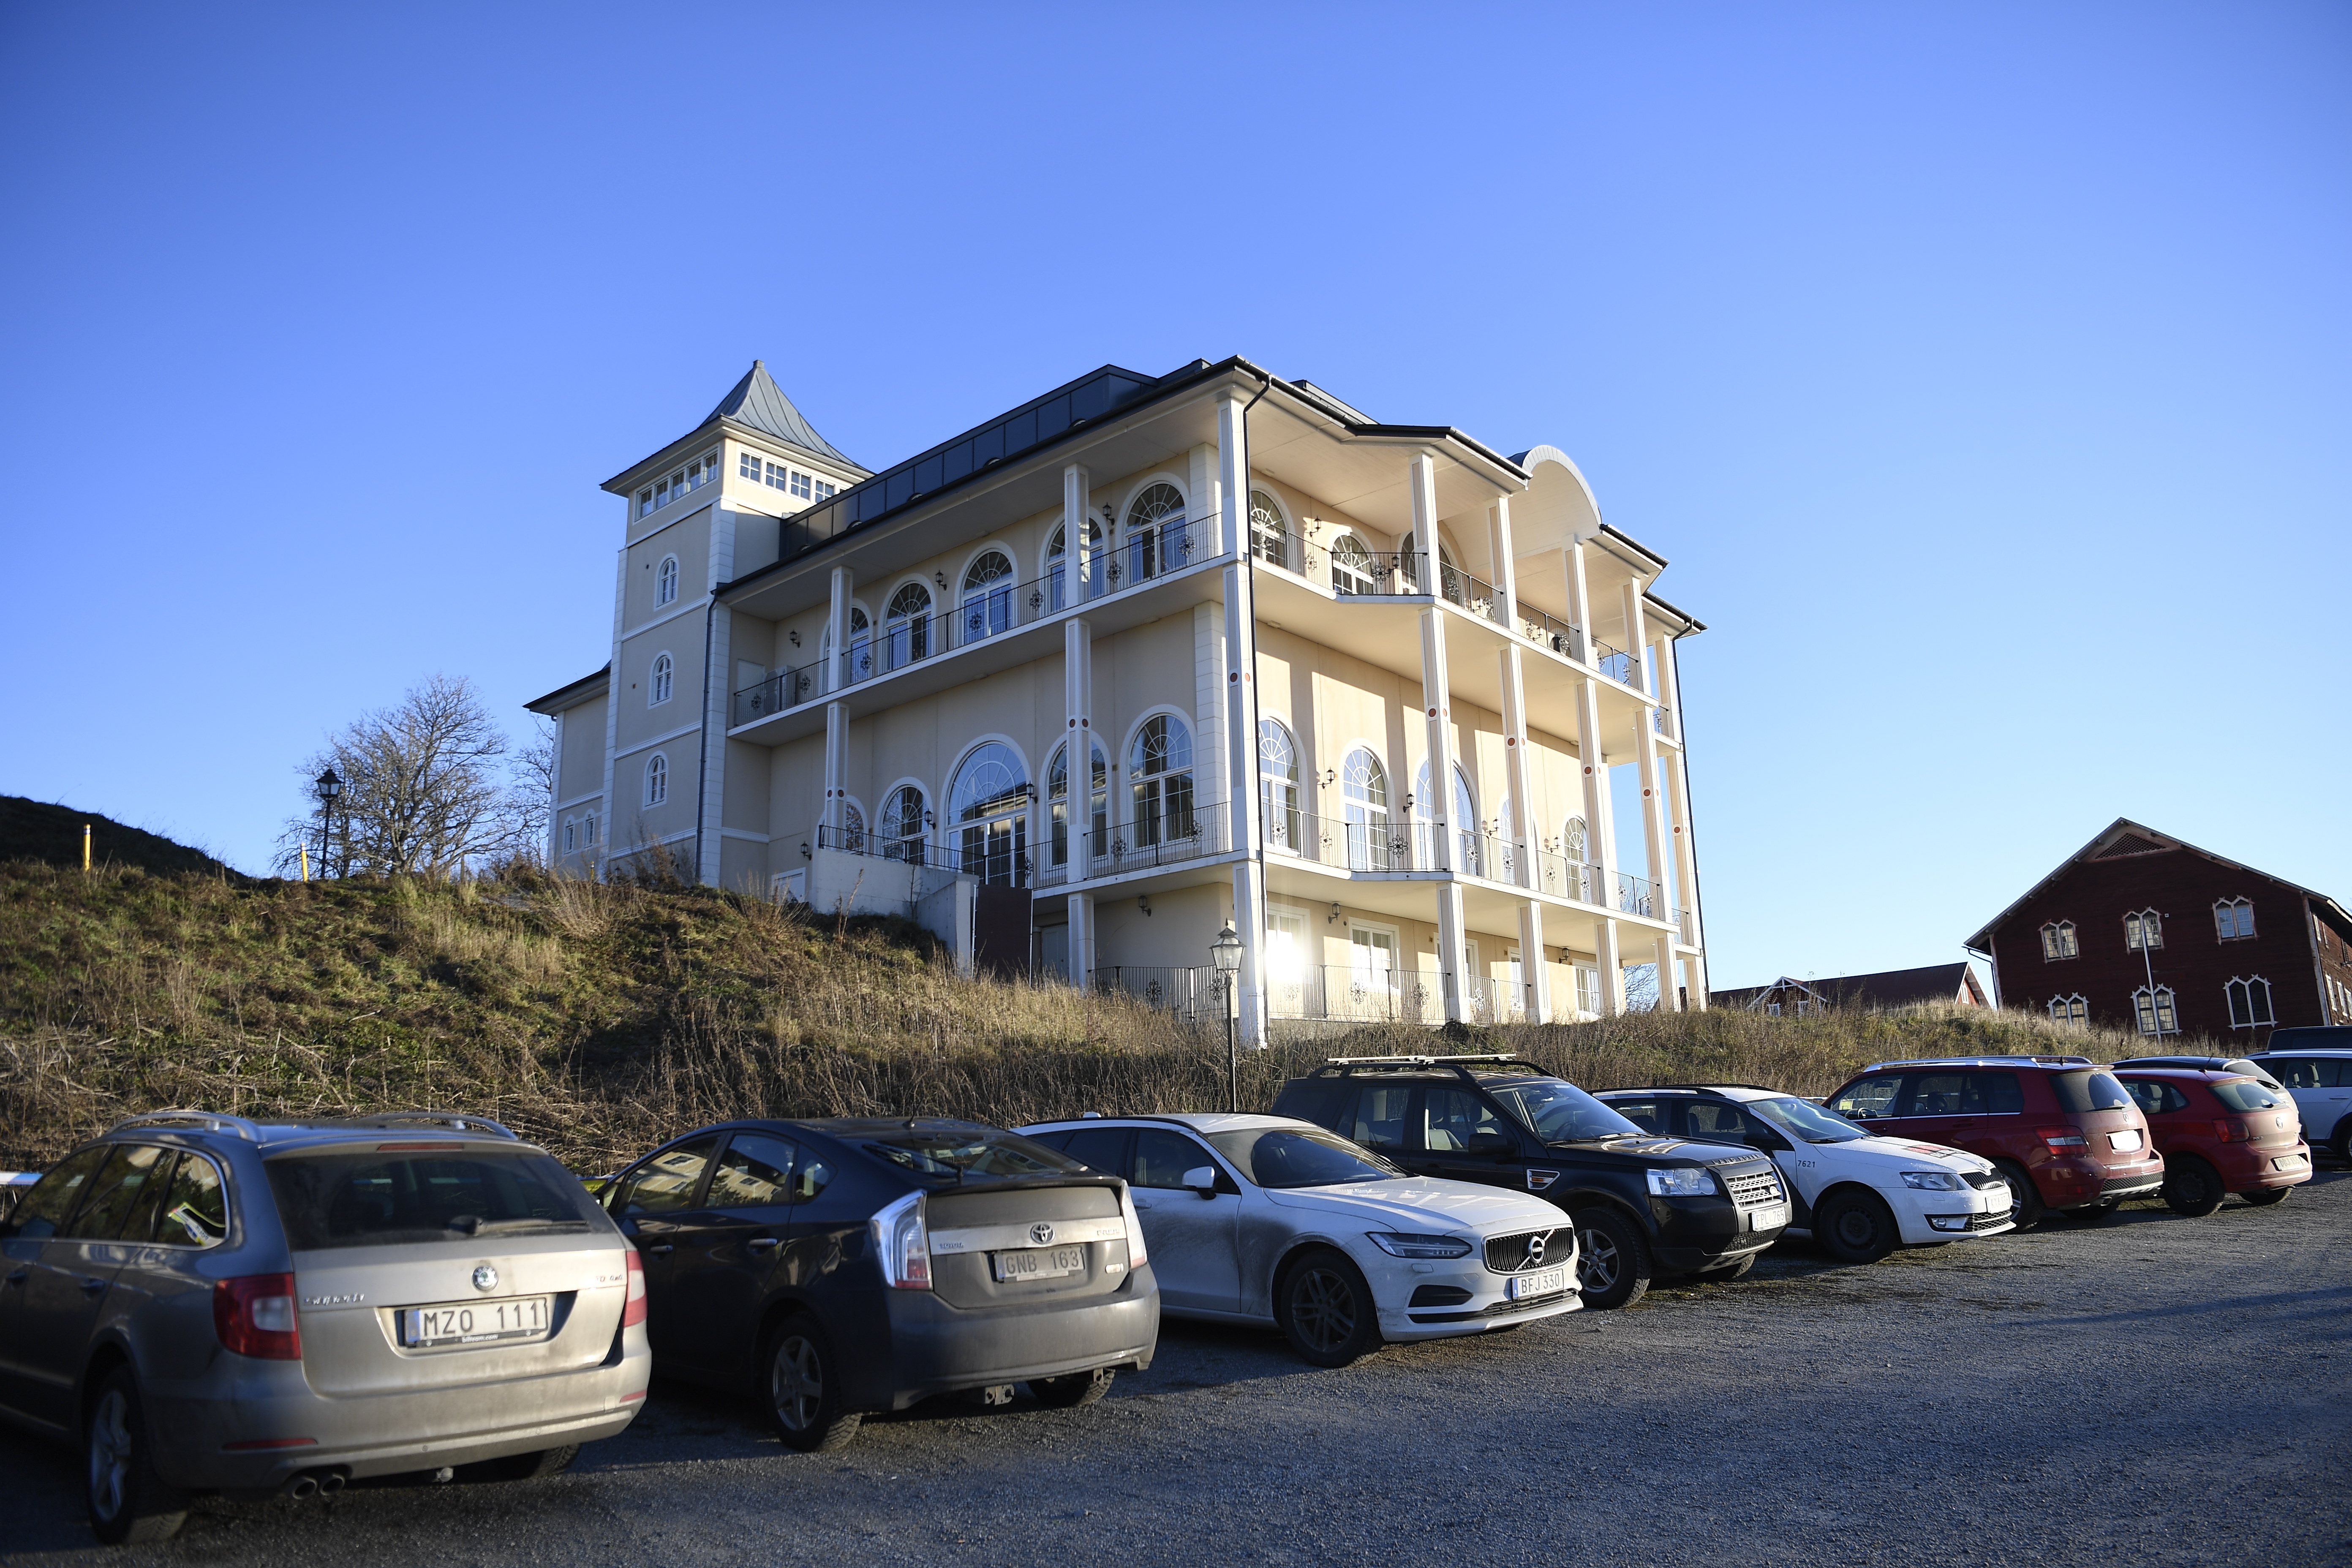 epa07209604 An exterior view of Johannesberg Castle, in Rimbo, 50km north of Stockholm, Sweden, 05 December 2018, where peace talks on Yemen is expected to take place later in the week. According to reports, Kuwaiti ambassador to Yemen Fahd Almeie and UN special envoy for Yemen Martin Griffiths accompanied a Houthi negotiating team to Sweden for UN-sponsored peace talks on the ongoing conflict between the Houthi rebels and the Saudi-backed Yemeni government.  EPA/SSTINA STJERNKVIST  SWEDEN OUT